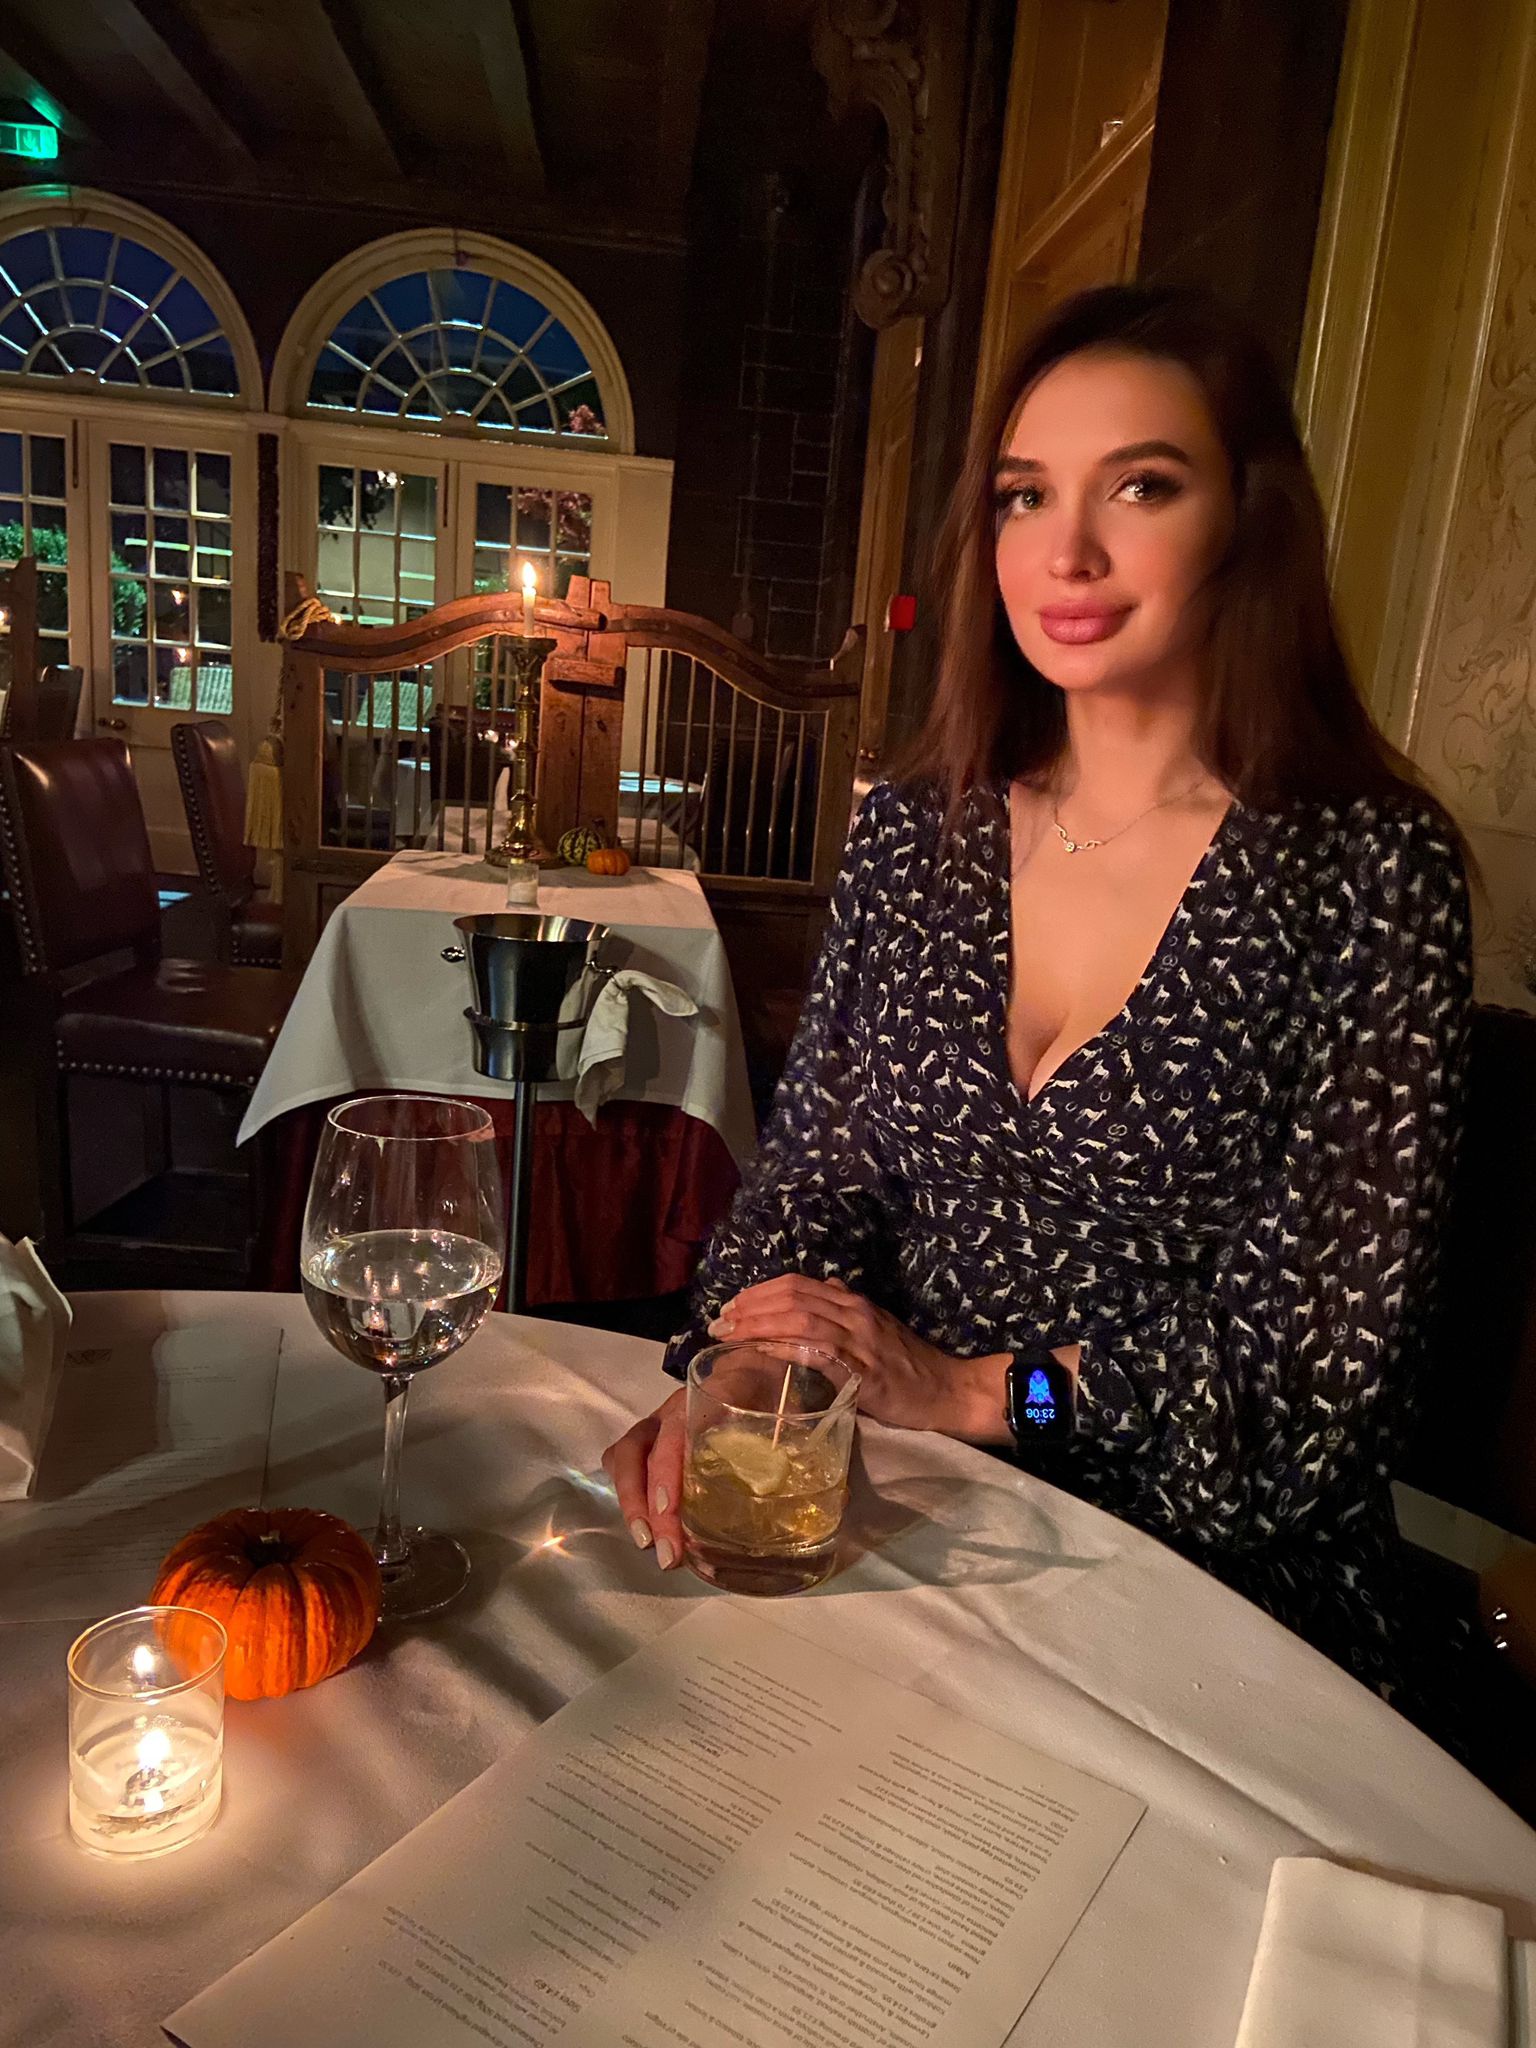 Evelyn at a table in a fancy restaurant